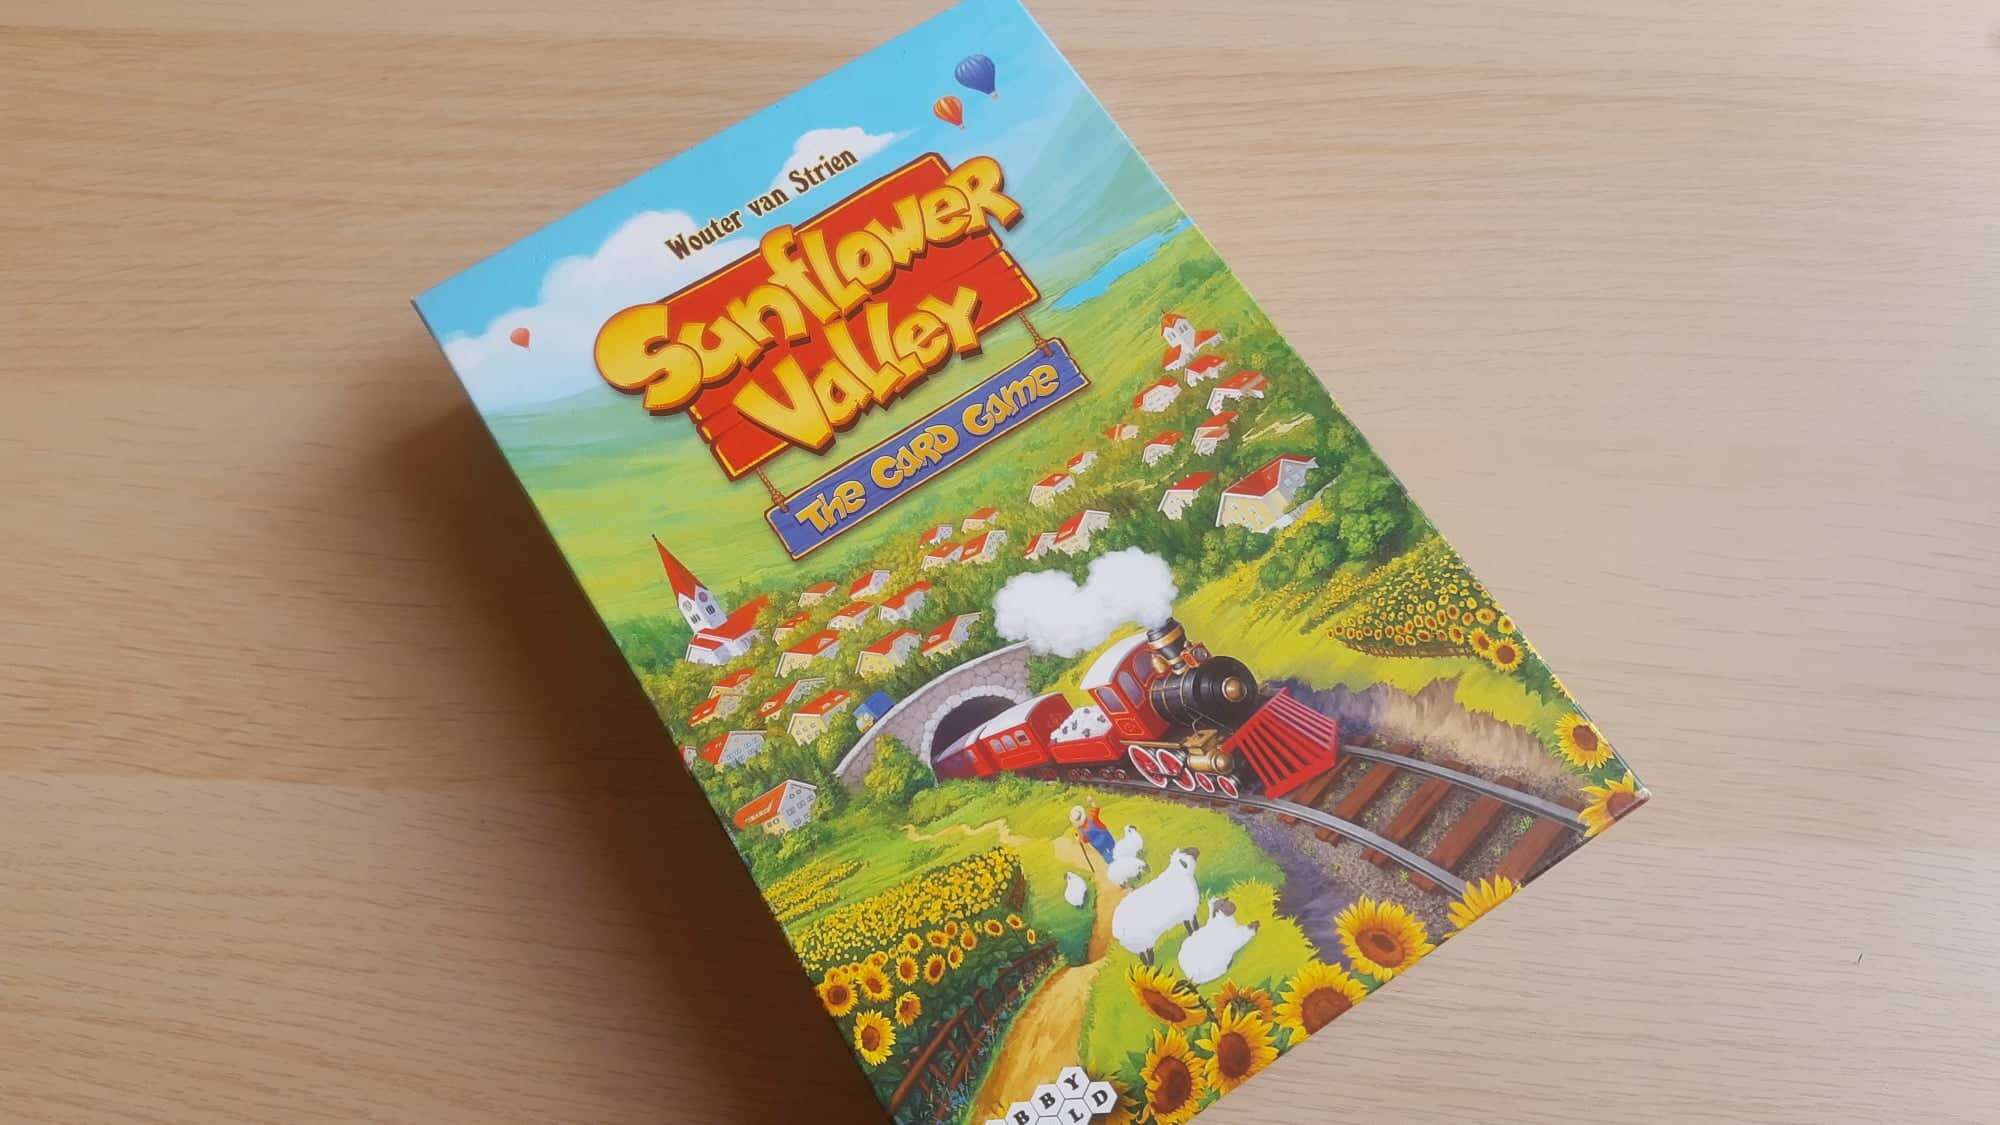 Sunflower Valley: The Card Game – Ако се кефите да пуф-пафкате